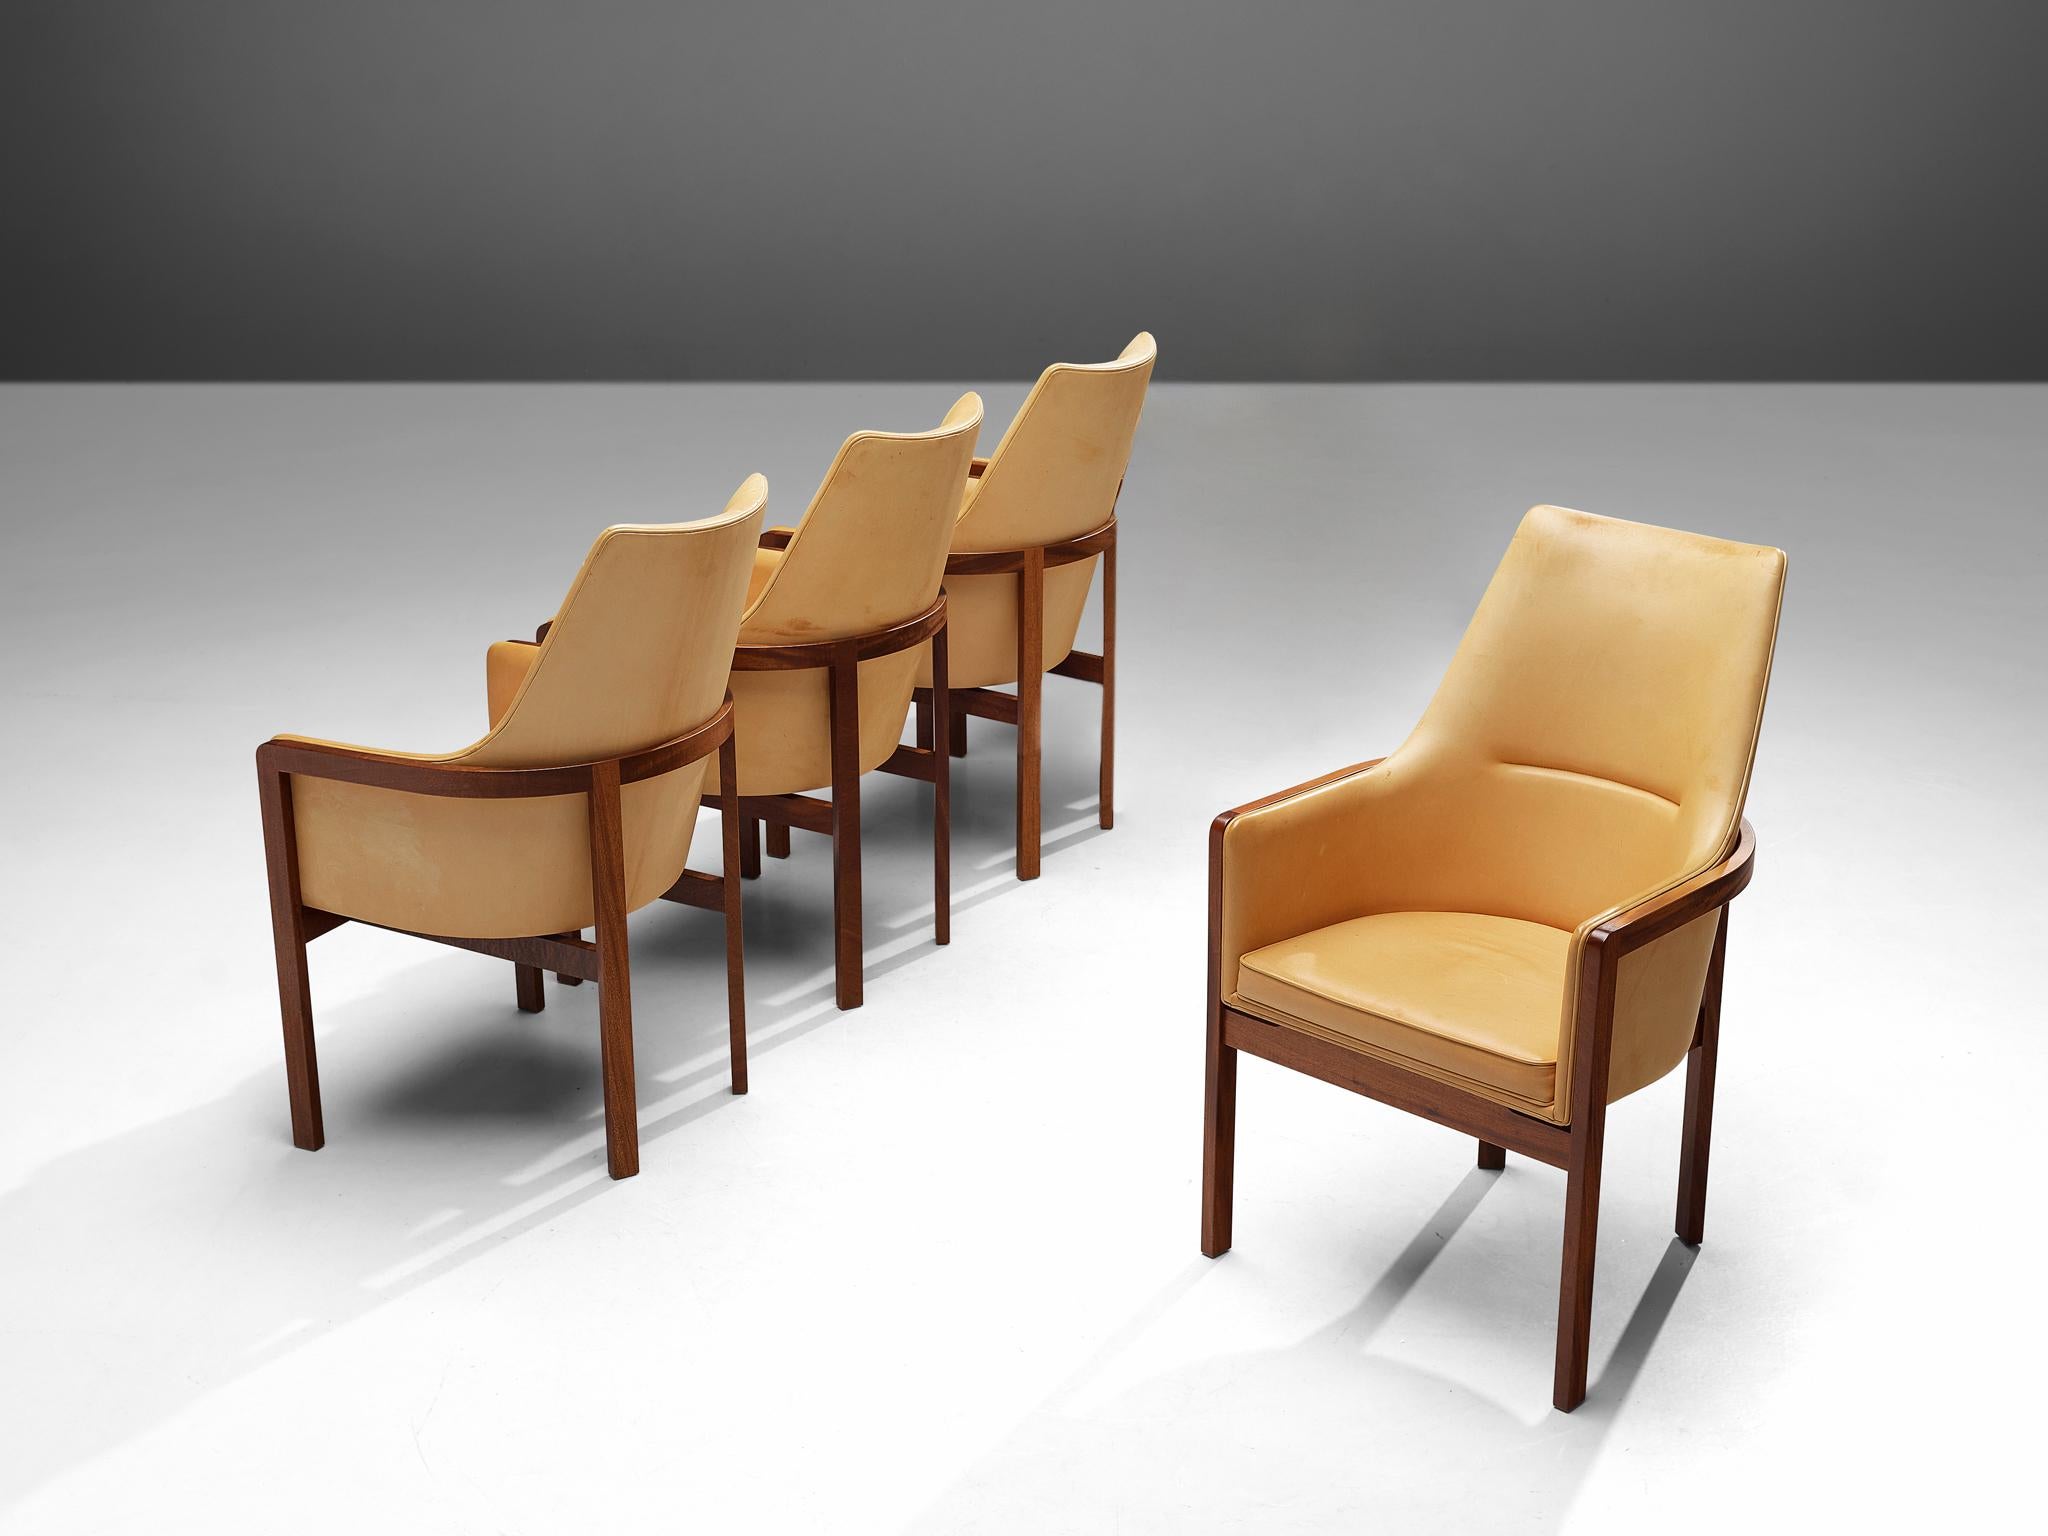 Bernt Petersen for Søborg Møbelfabrik, set of four dining chairs, leather, mahogany, Denmark, 1960s

Elegant and comfortable set of four dining chairs designed by Bernt Petersen in the 1960s. The chairs are executed in a mahogany frame and leather